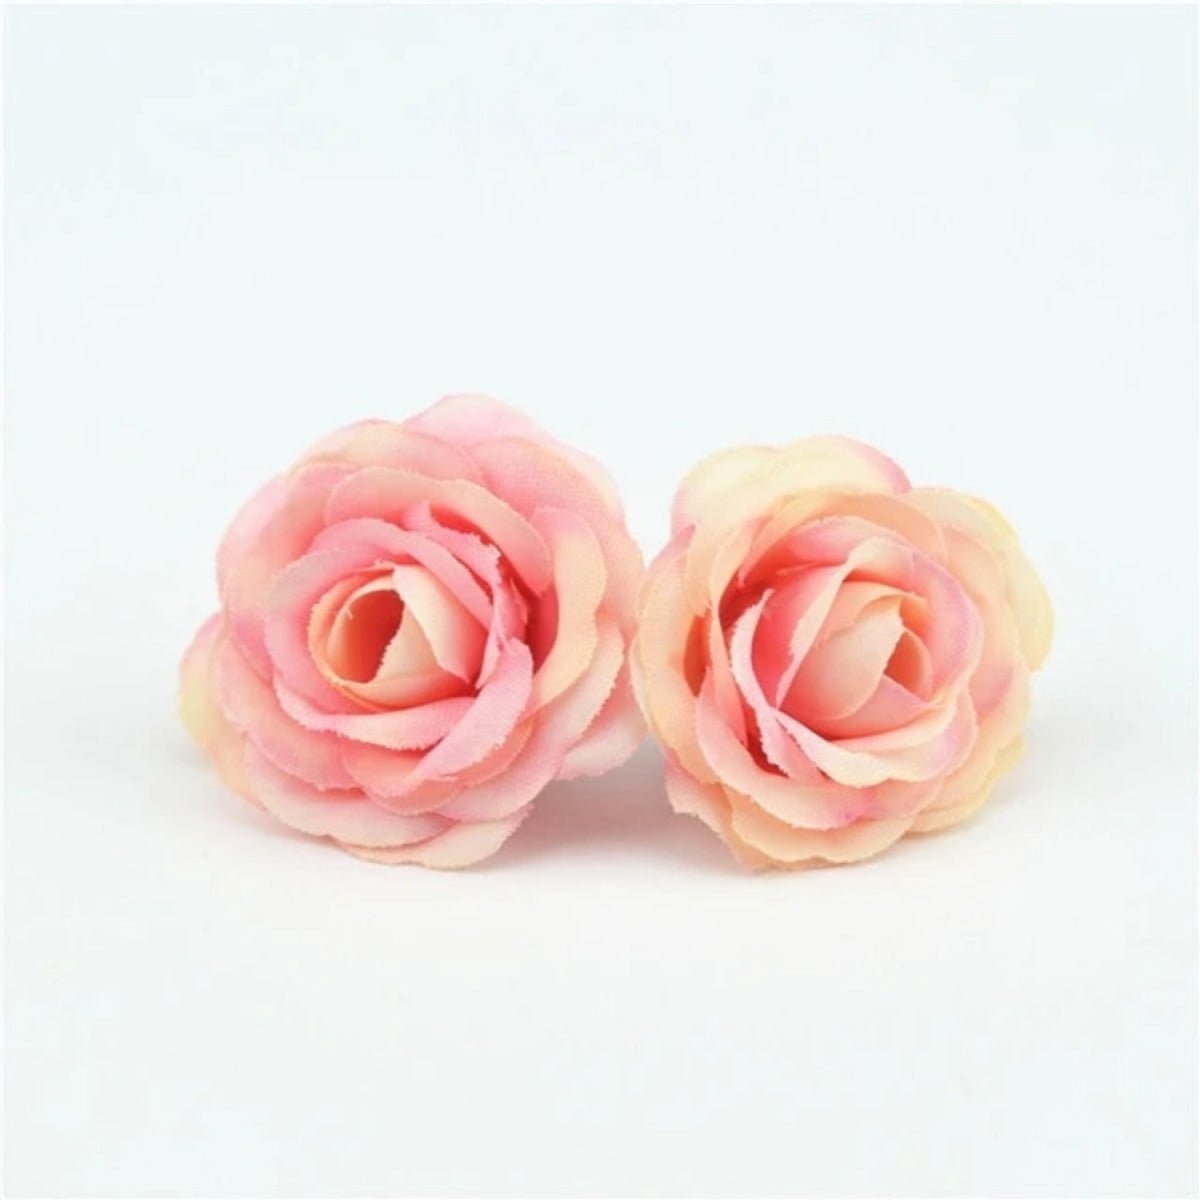 10pcs 2.5cm Mini Rose Cloth Artificial Flower For Wedding Party Home Decorations - Champagne - - Asia Sell